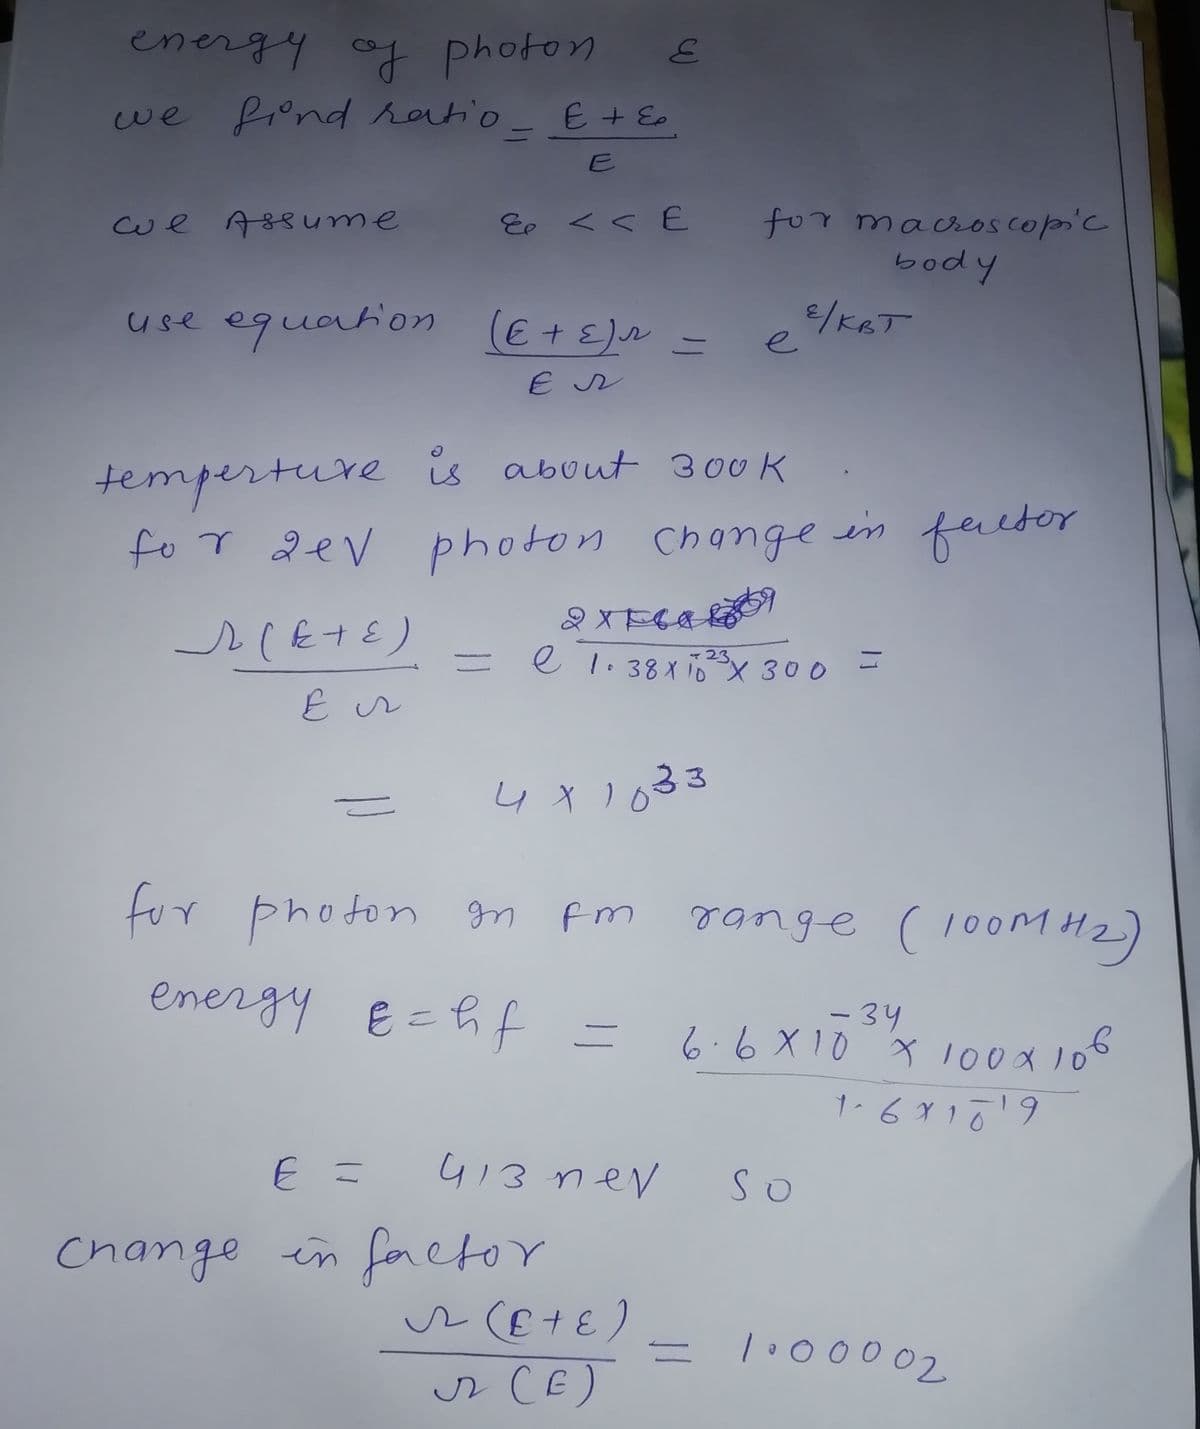 energy of photon
we fiond ratio.
E + E.
13D
E
for macros cop'c
body
Cwe Assume
Eo く< E
use equation
(E +E)
e
temperture is about 300 K
fo r dev photon Change
in factor
e 1. 38x 1x 300
ャ23
ニ
4x1033
range (100M H2)
fur photon gn fm
energy E=hf =
-34
6.6X10 x l00x 10°
413 nev
So
Change in foctor
lo00002
r CE)
